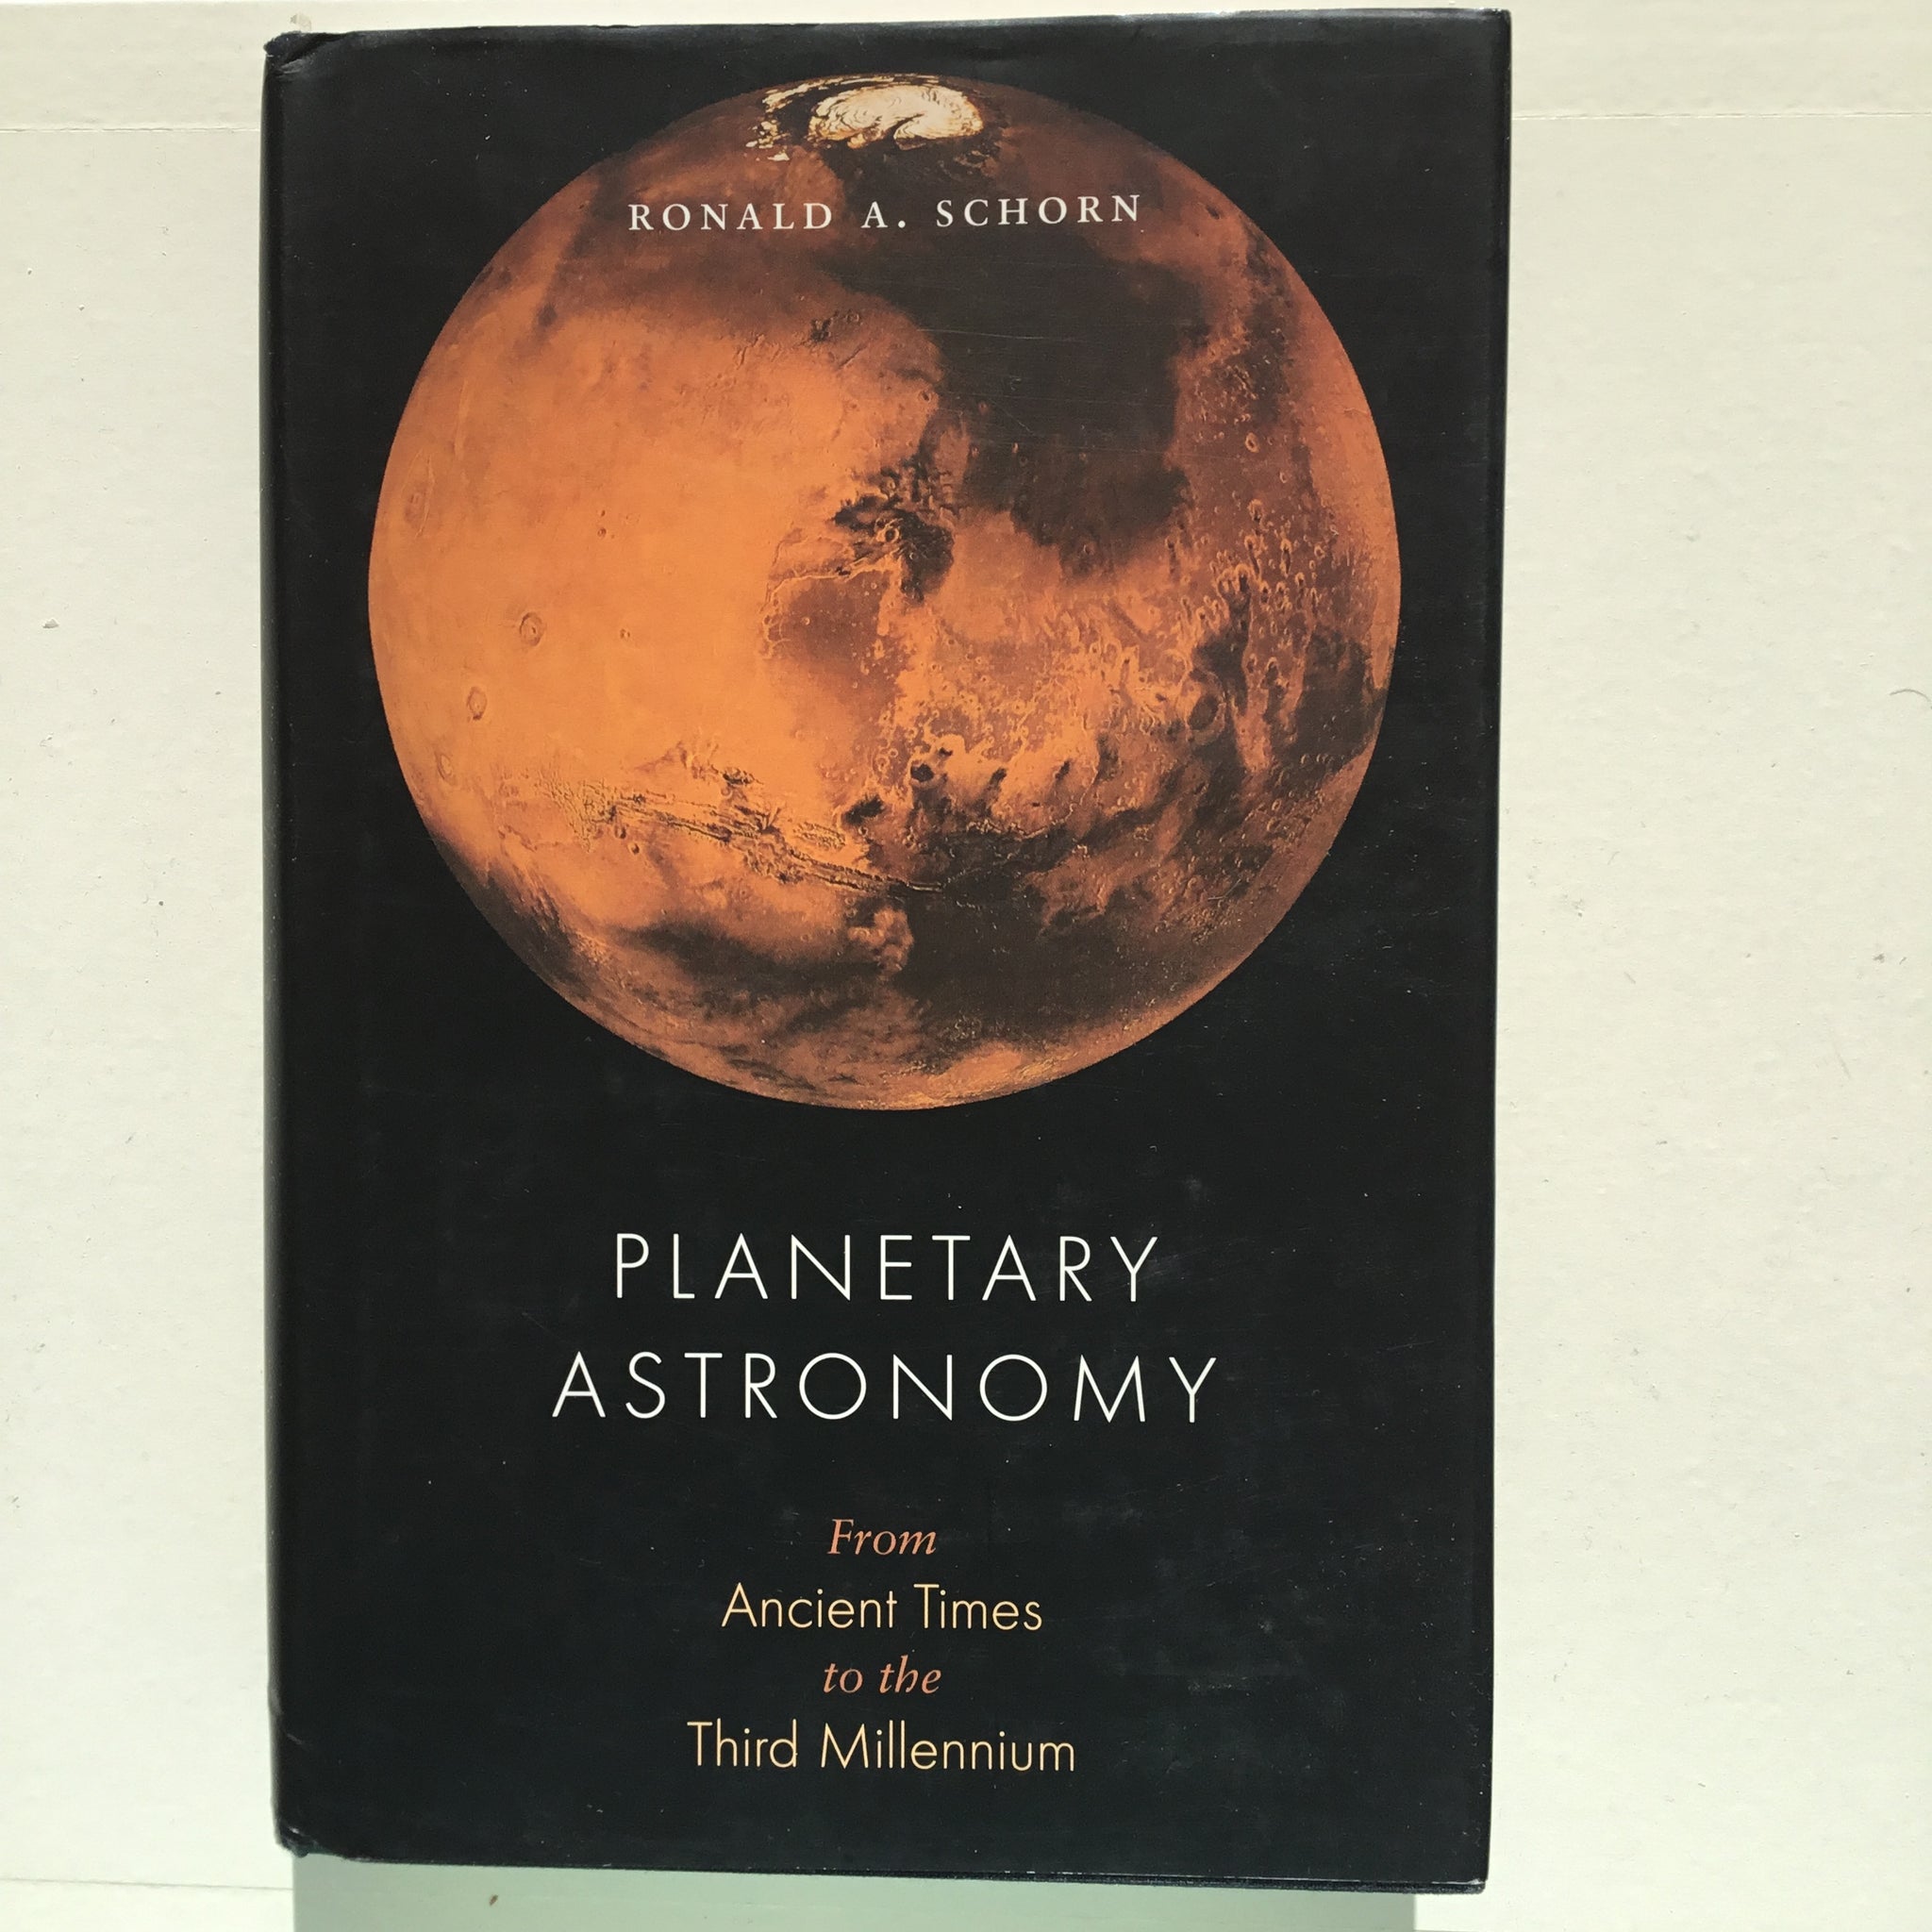 Planetary Astronomy: From Ancient Times to the Third Millennium